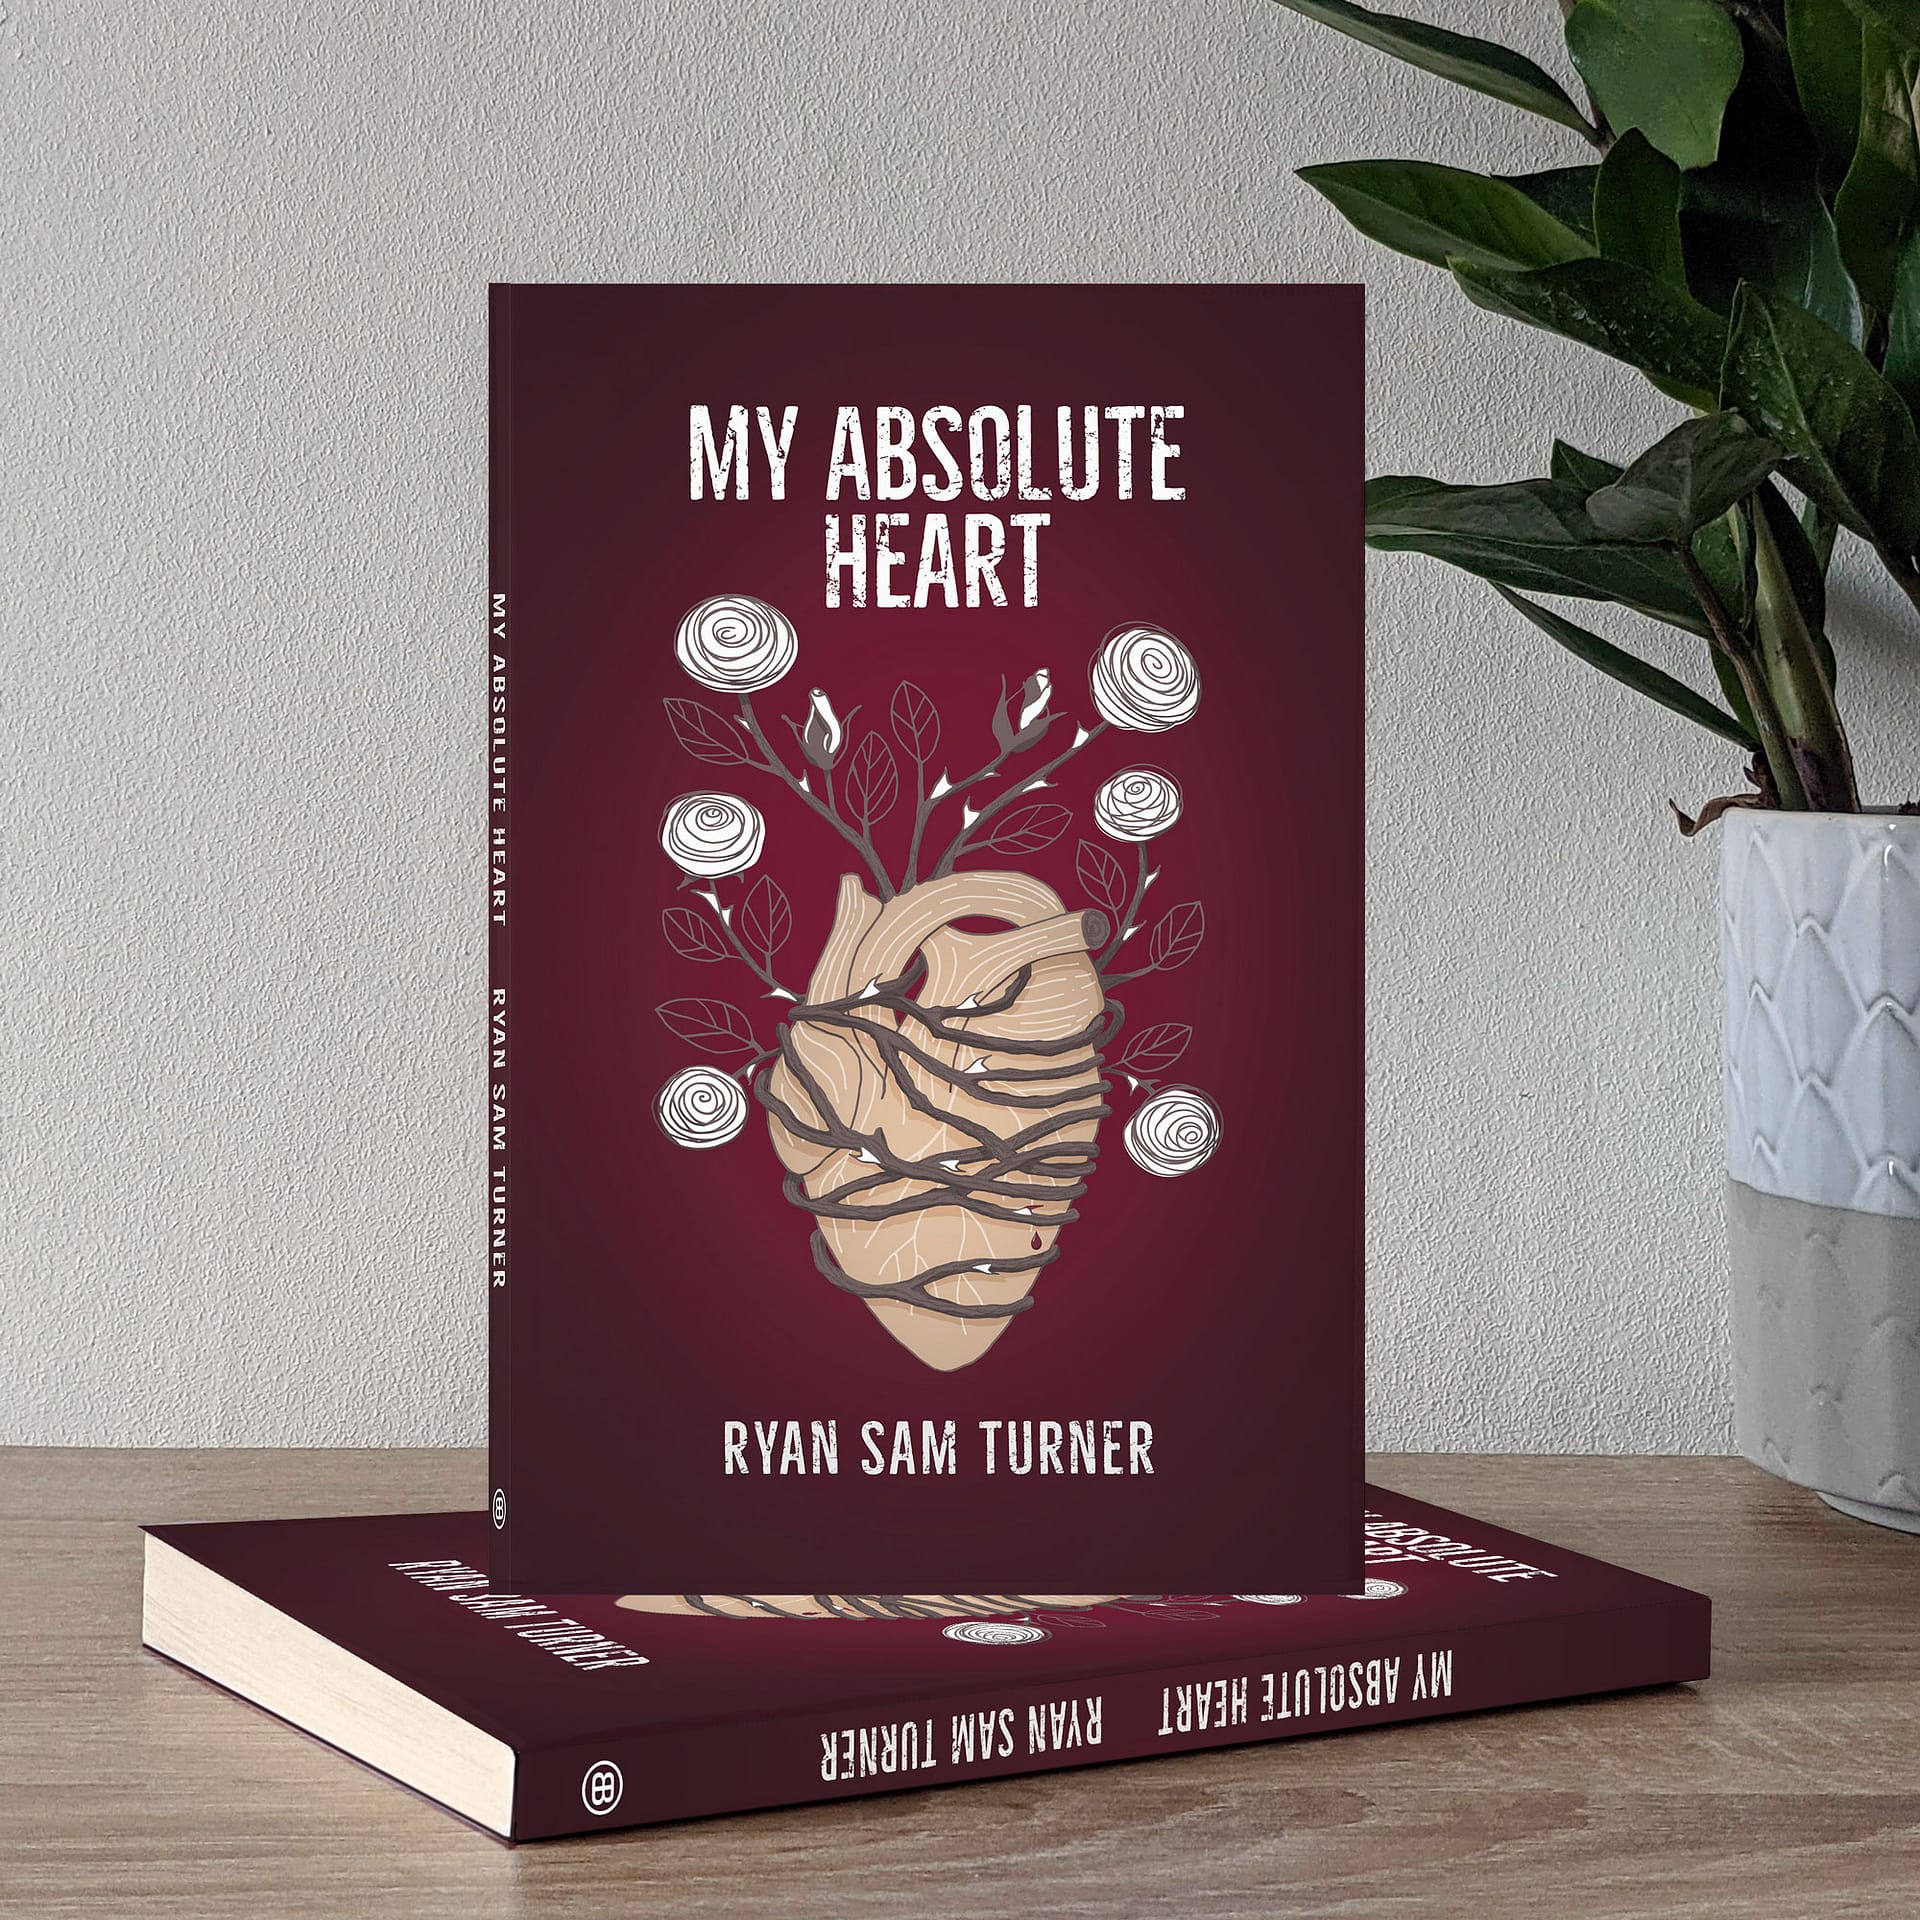 My-Absolute-Heart-Poem-Anthology-Cover-illustration-and-Design-Portfolio-by-Kati-Lacey-book-cover-designer